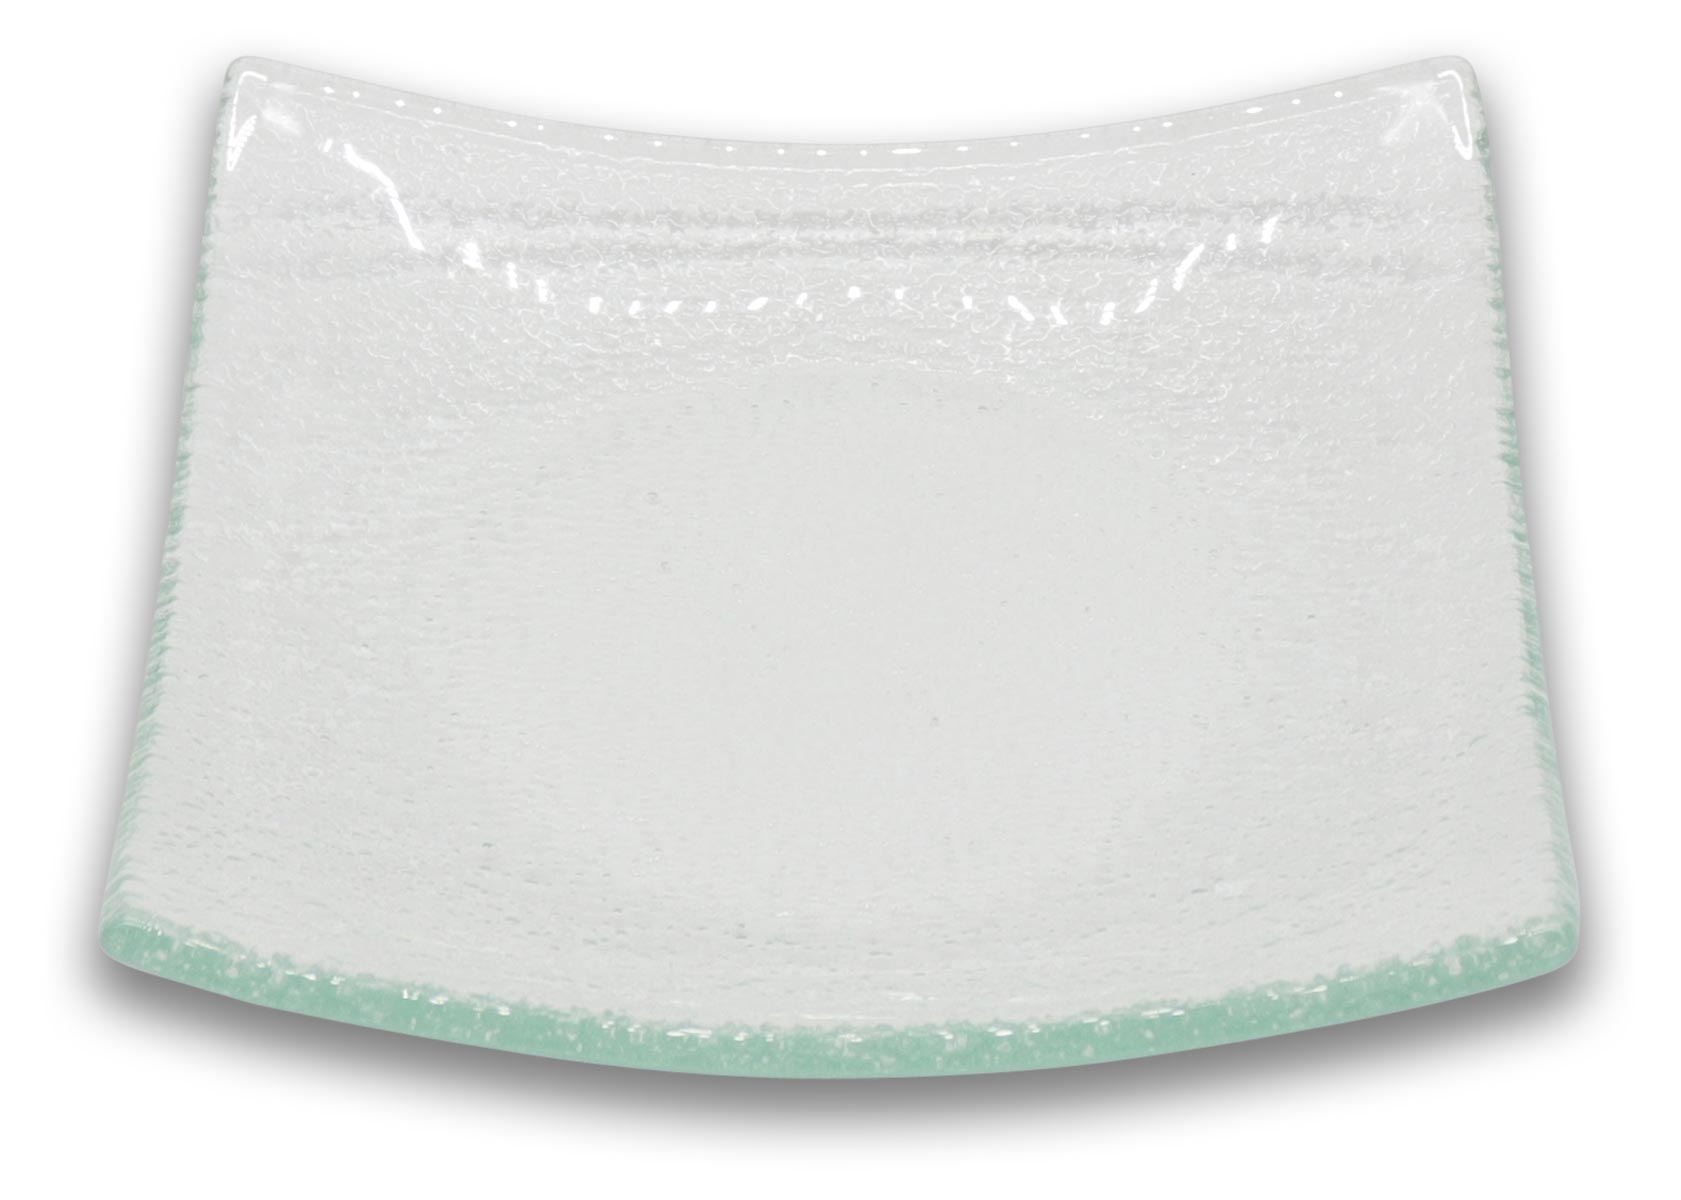 Vaulted glass plate clear, 